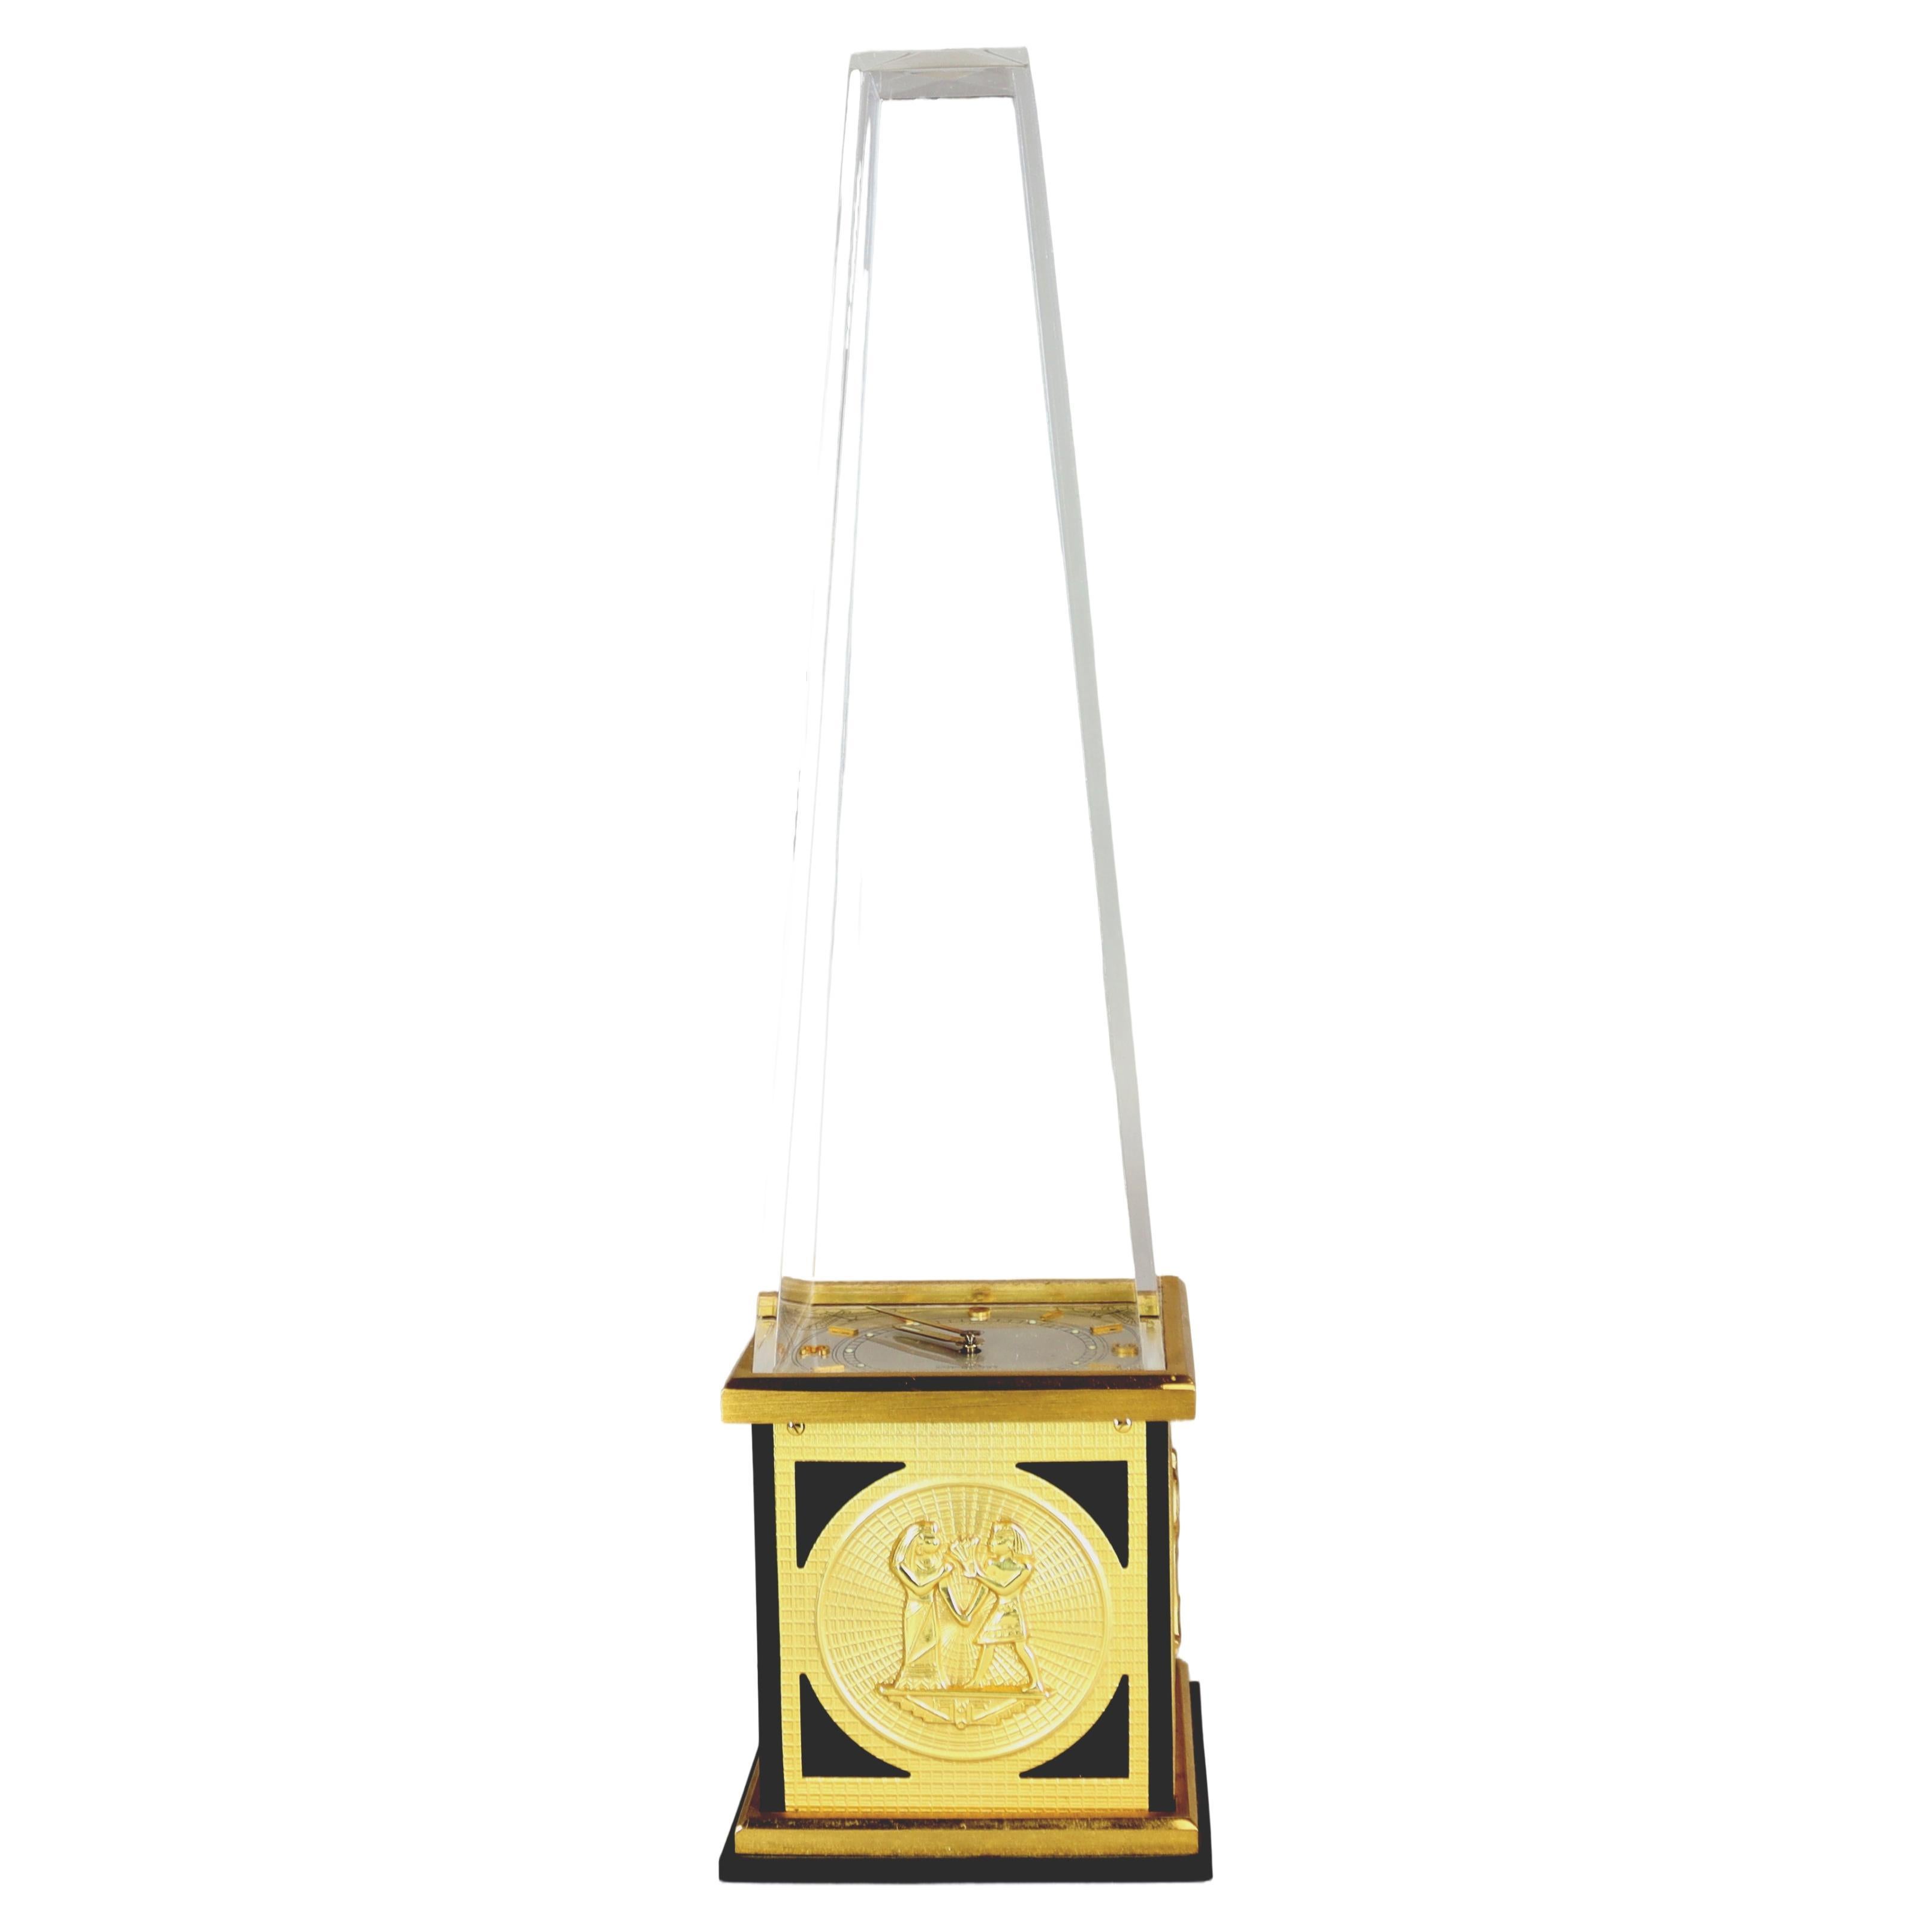 A Novelty Desk Clock By Jaeger LeCoultre For Sale